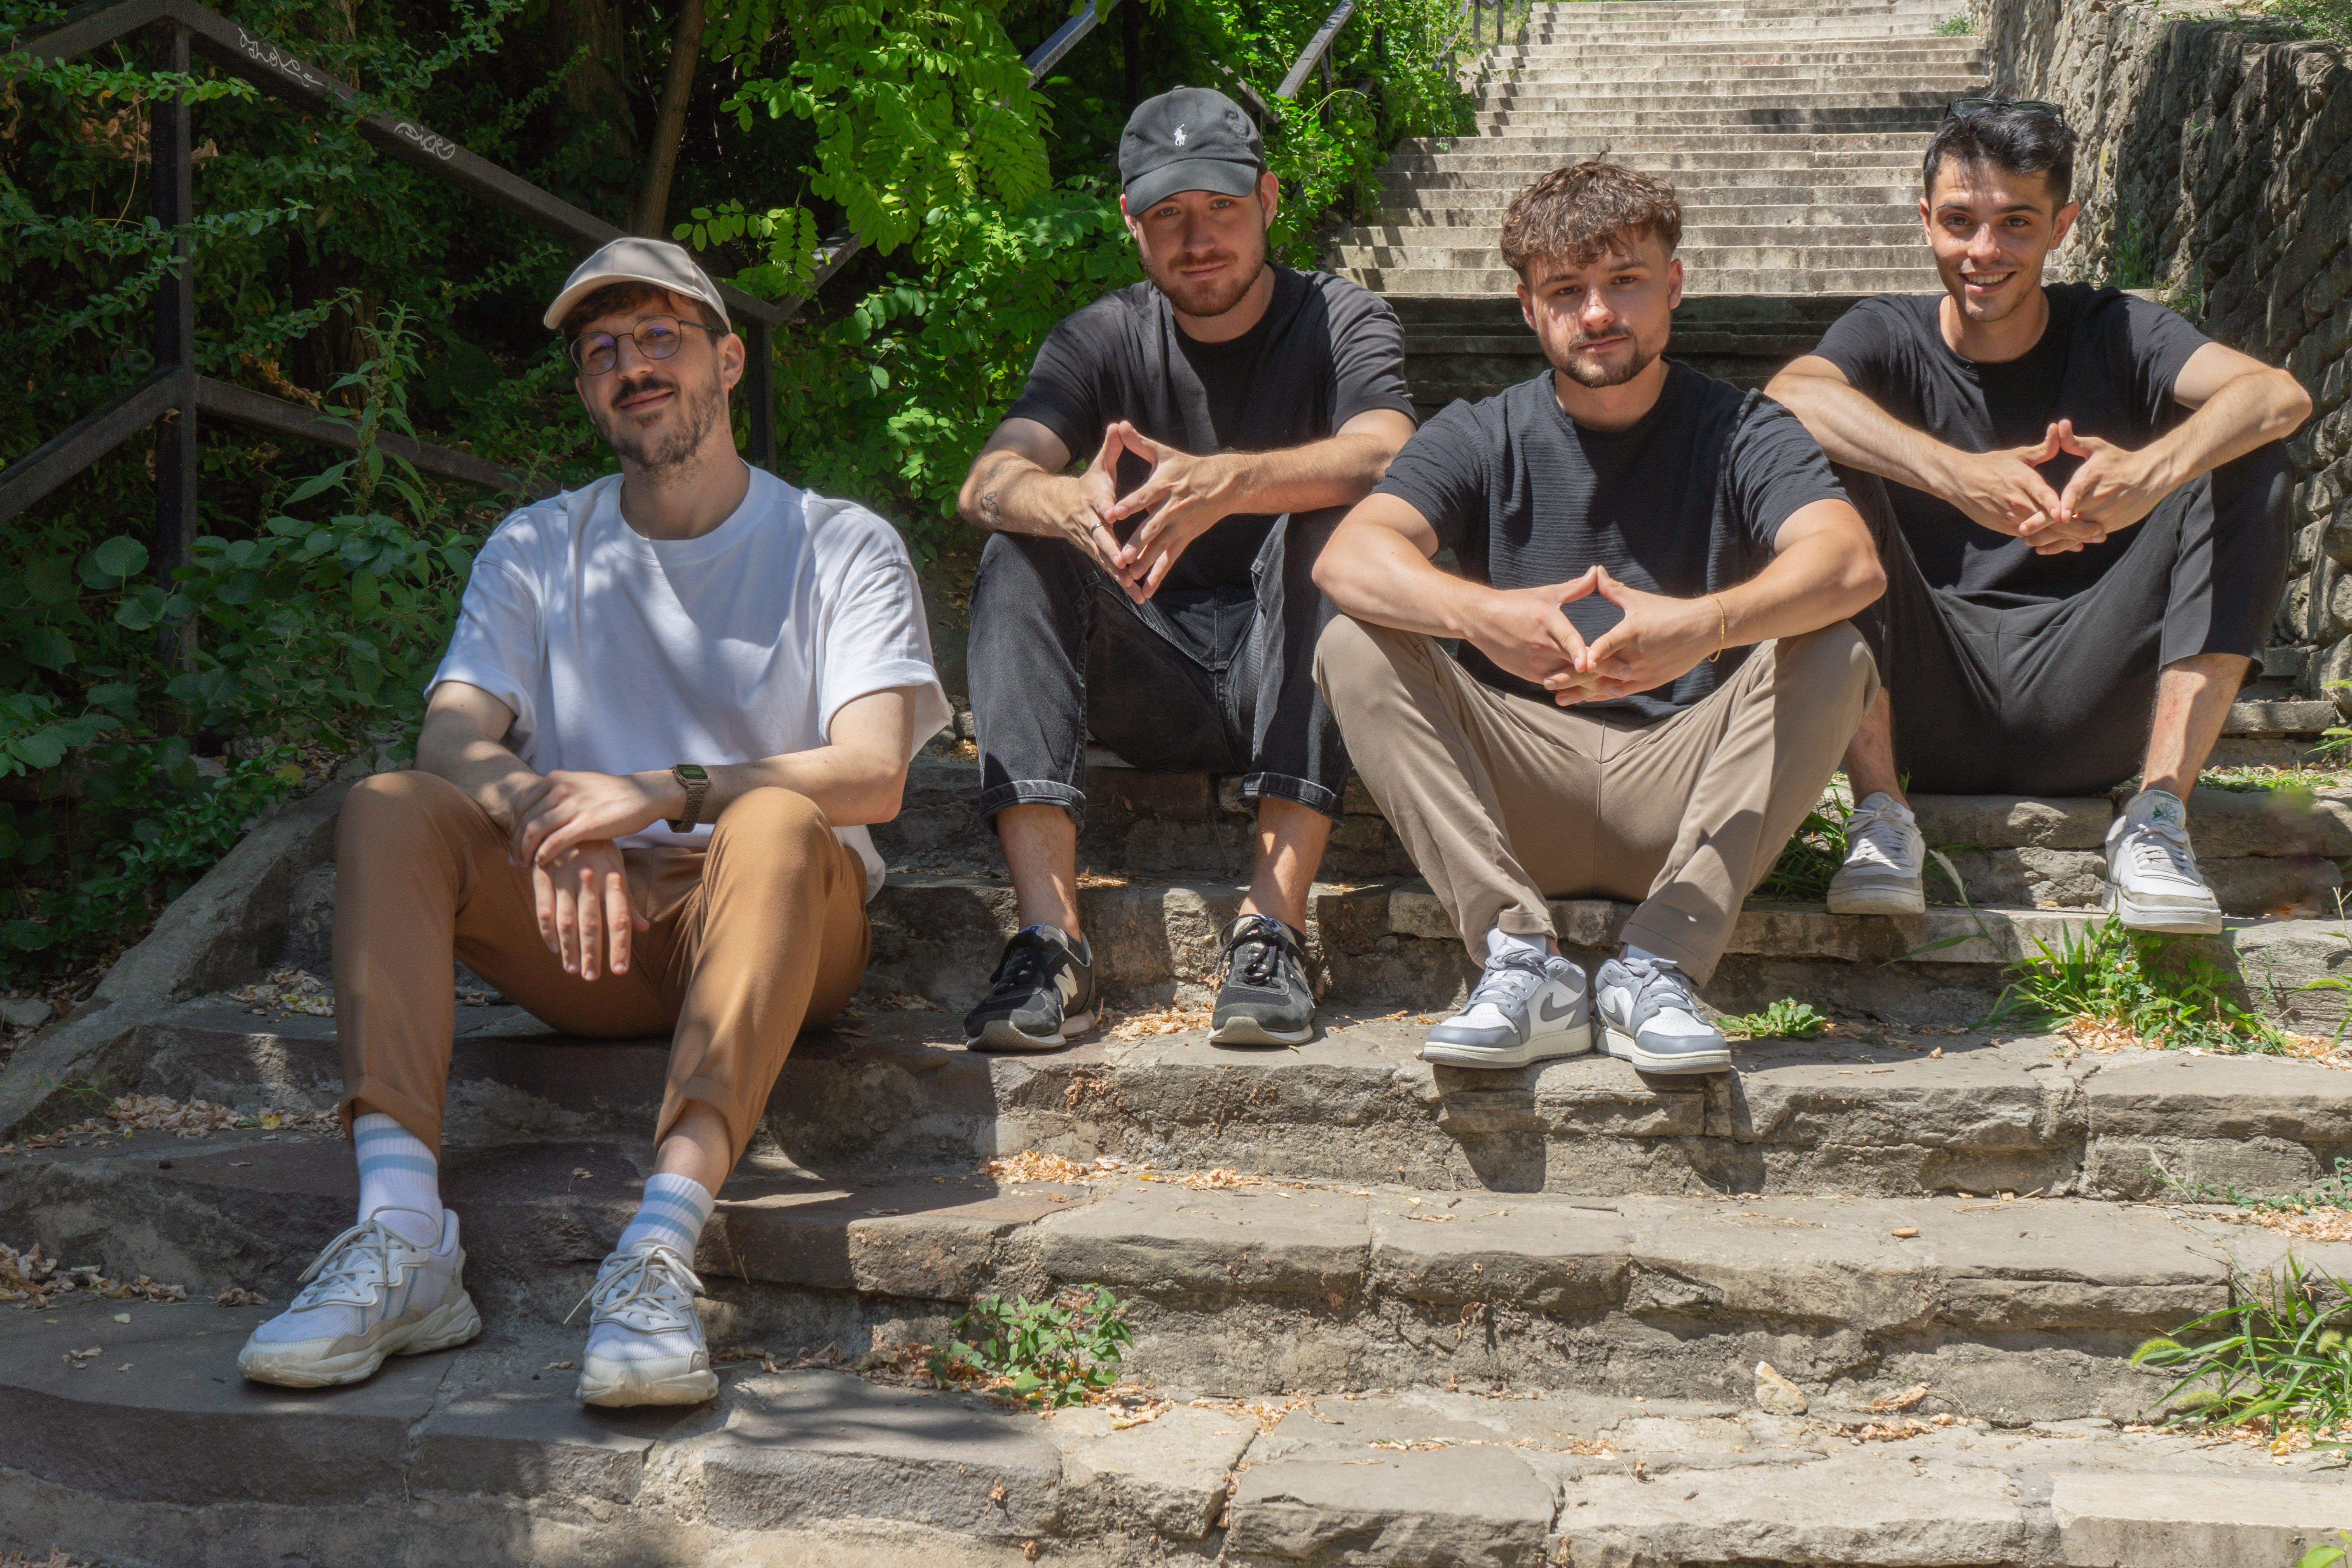 Four of the Once Advertisements employees, Matyas Laneury, Gergo Mezes, Krisztian Mezei, and Kristof Menesi sitting on the stairs at ‘Gellért Hill’ in Hungary.